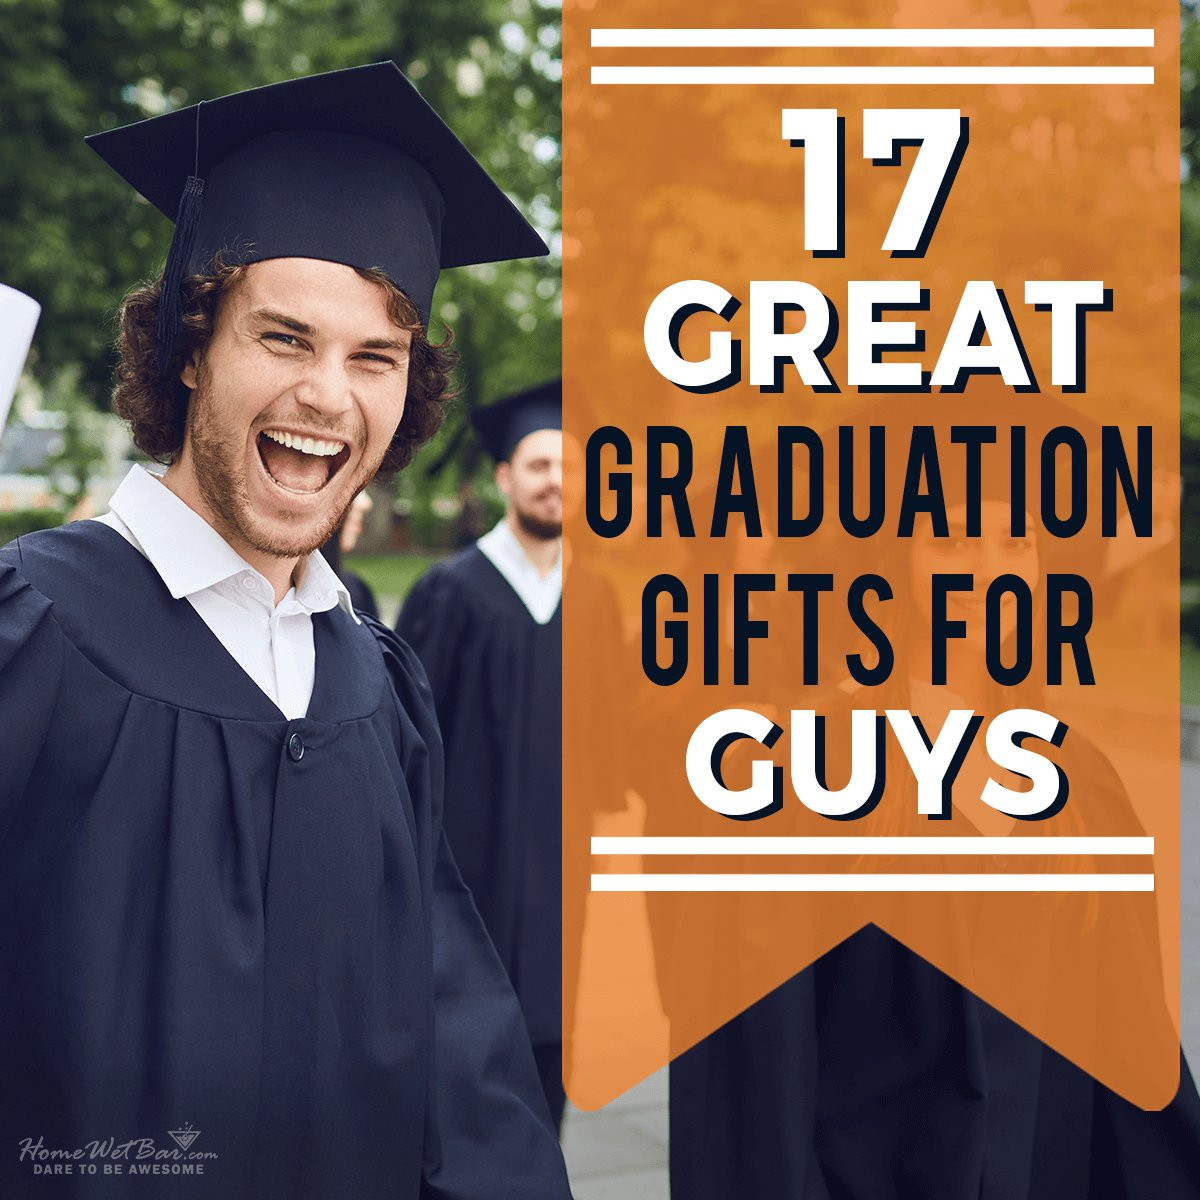 Graduation Gift Ideas For Guys
 17 Great Graduation Gifts for Guys